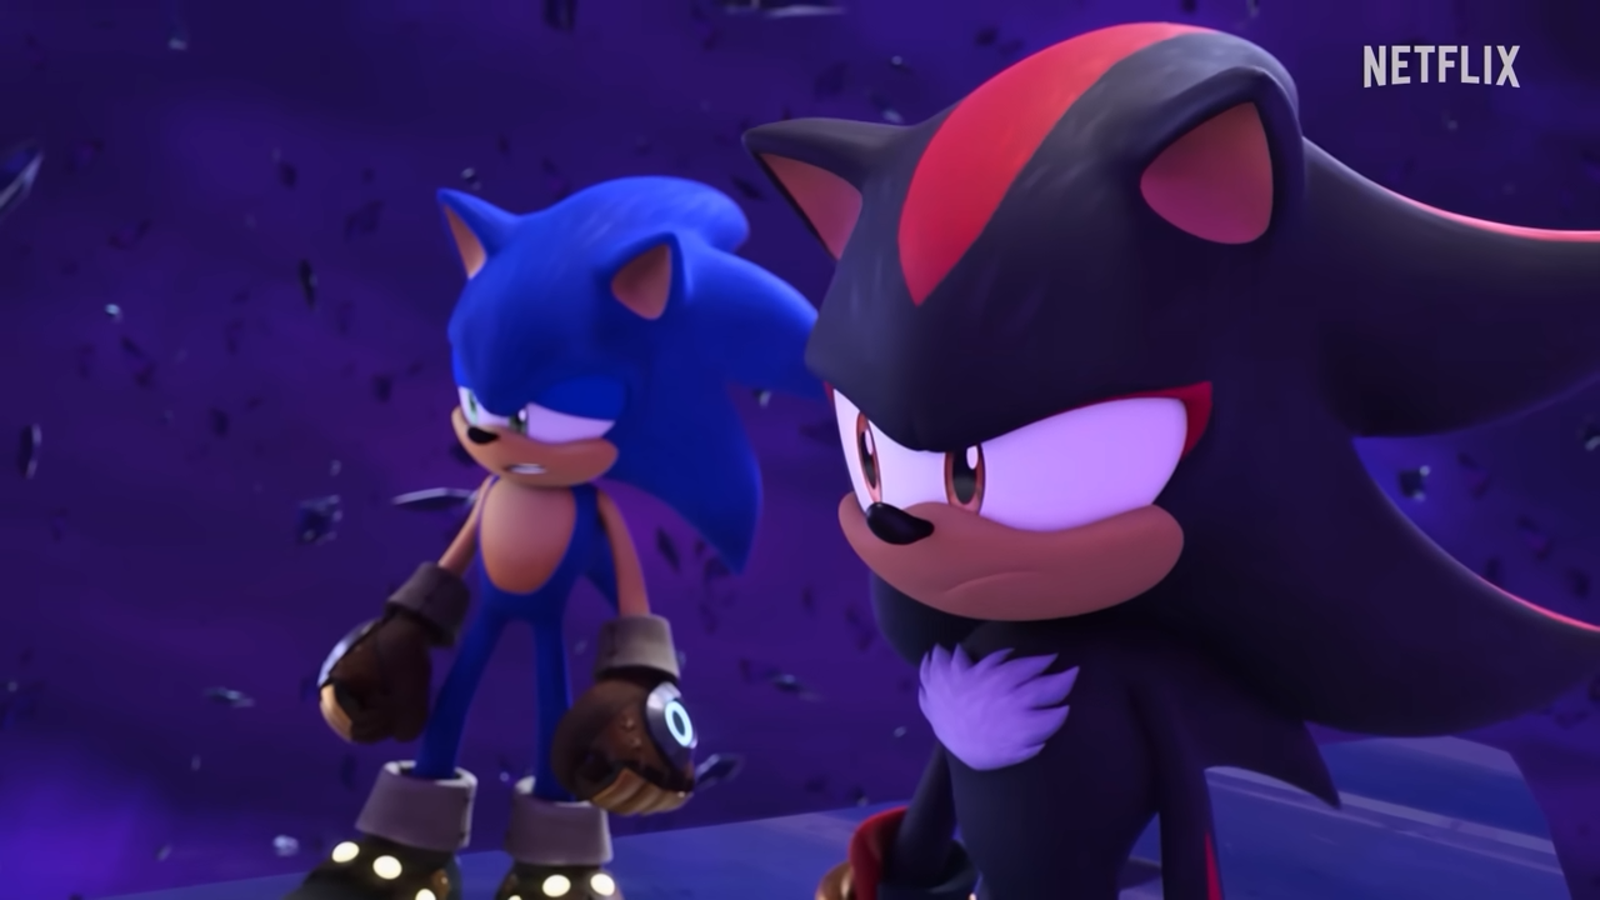 Go watch the latest episode of Sonic Prime Part 2 - The Sonic News Leader